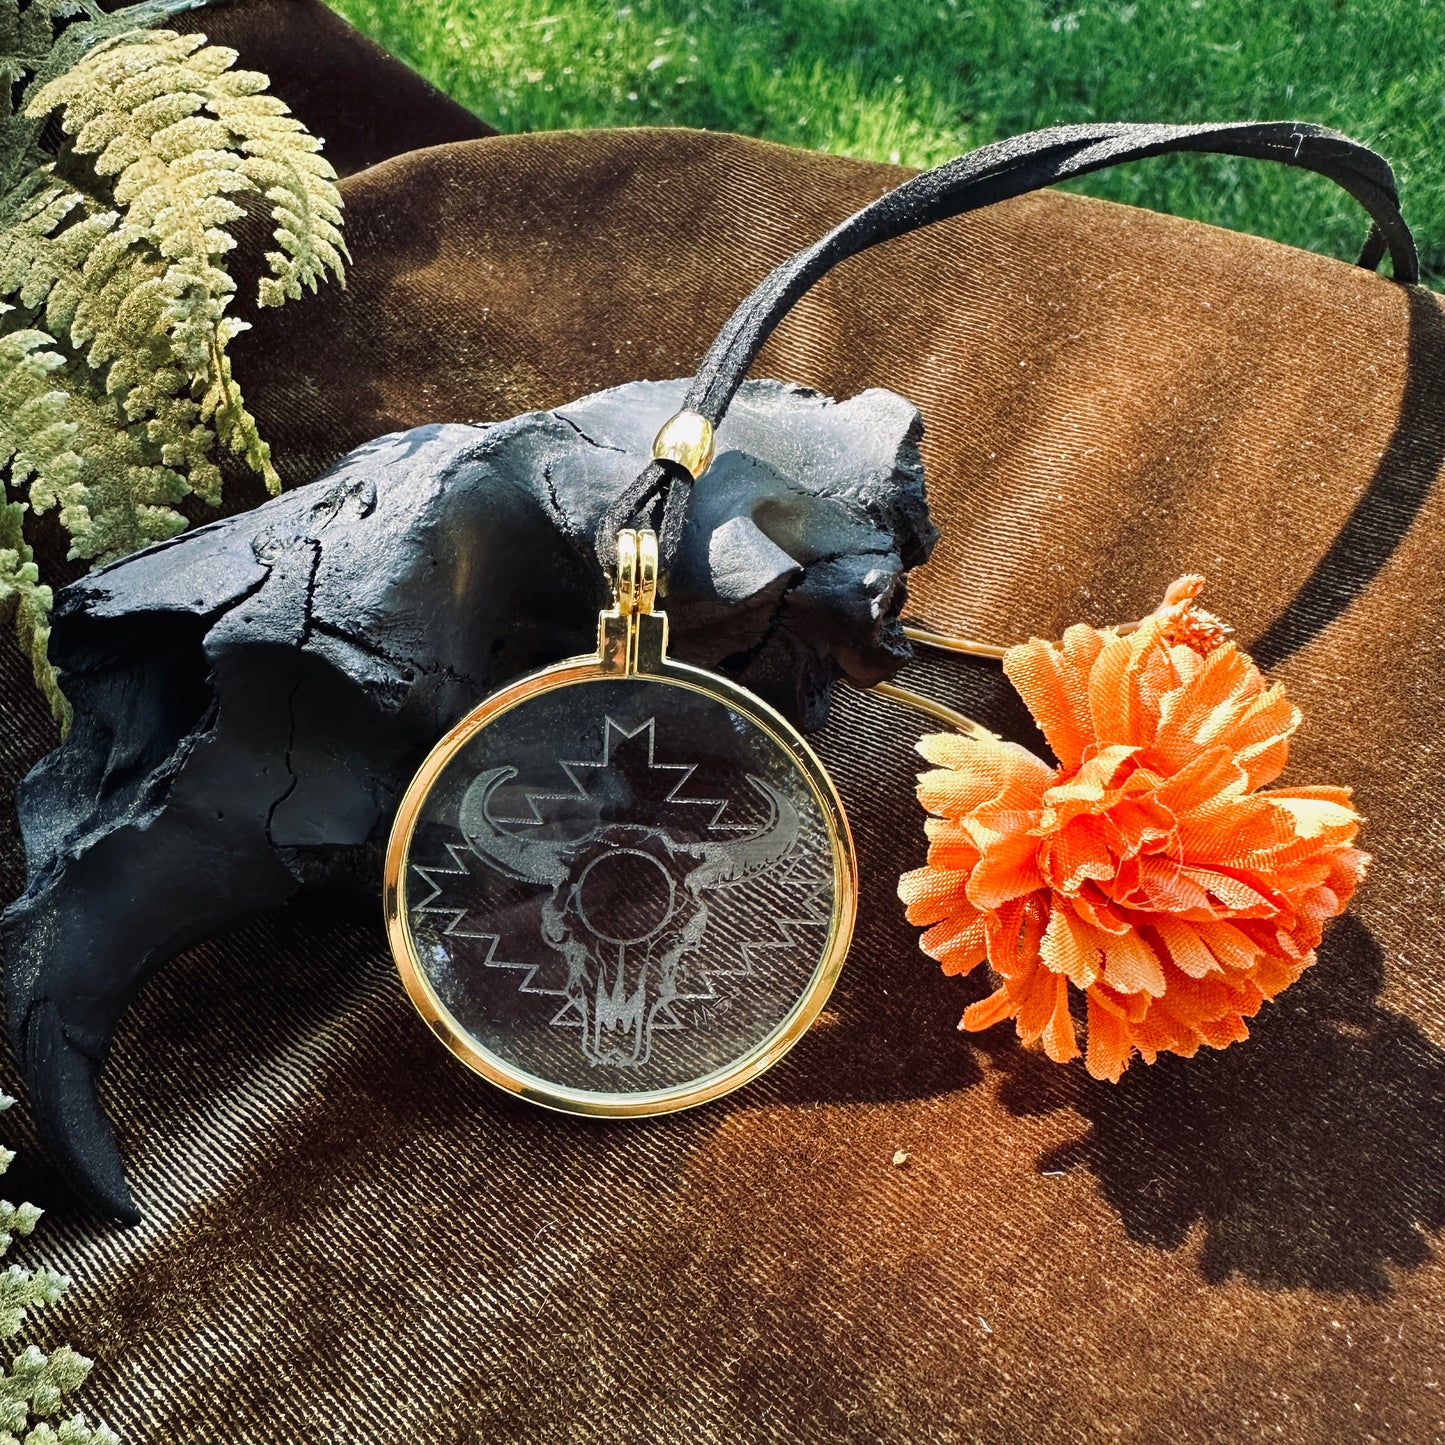 Bison Necklace, Solar Lighter, Magnifying Glass Necklace, Sustainable Jewelry, Cannabis Accessory